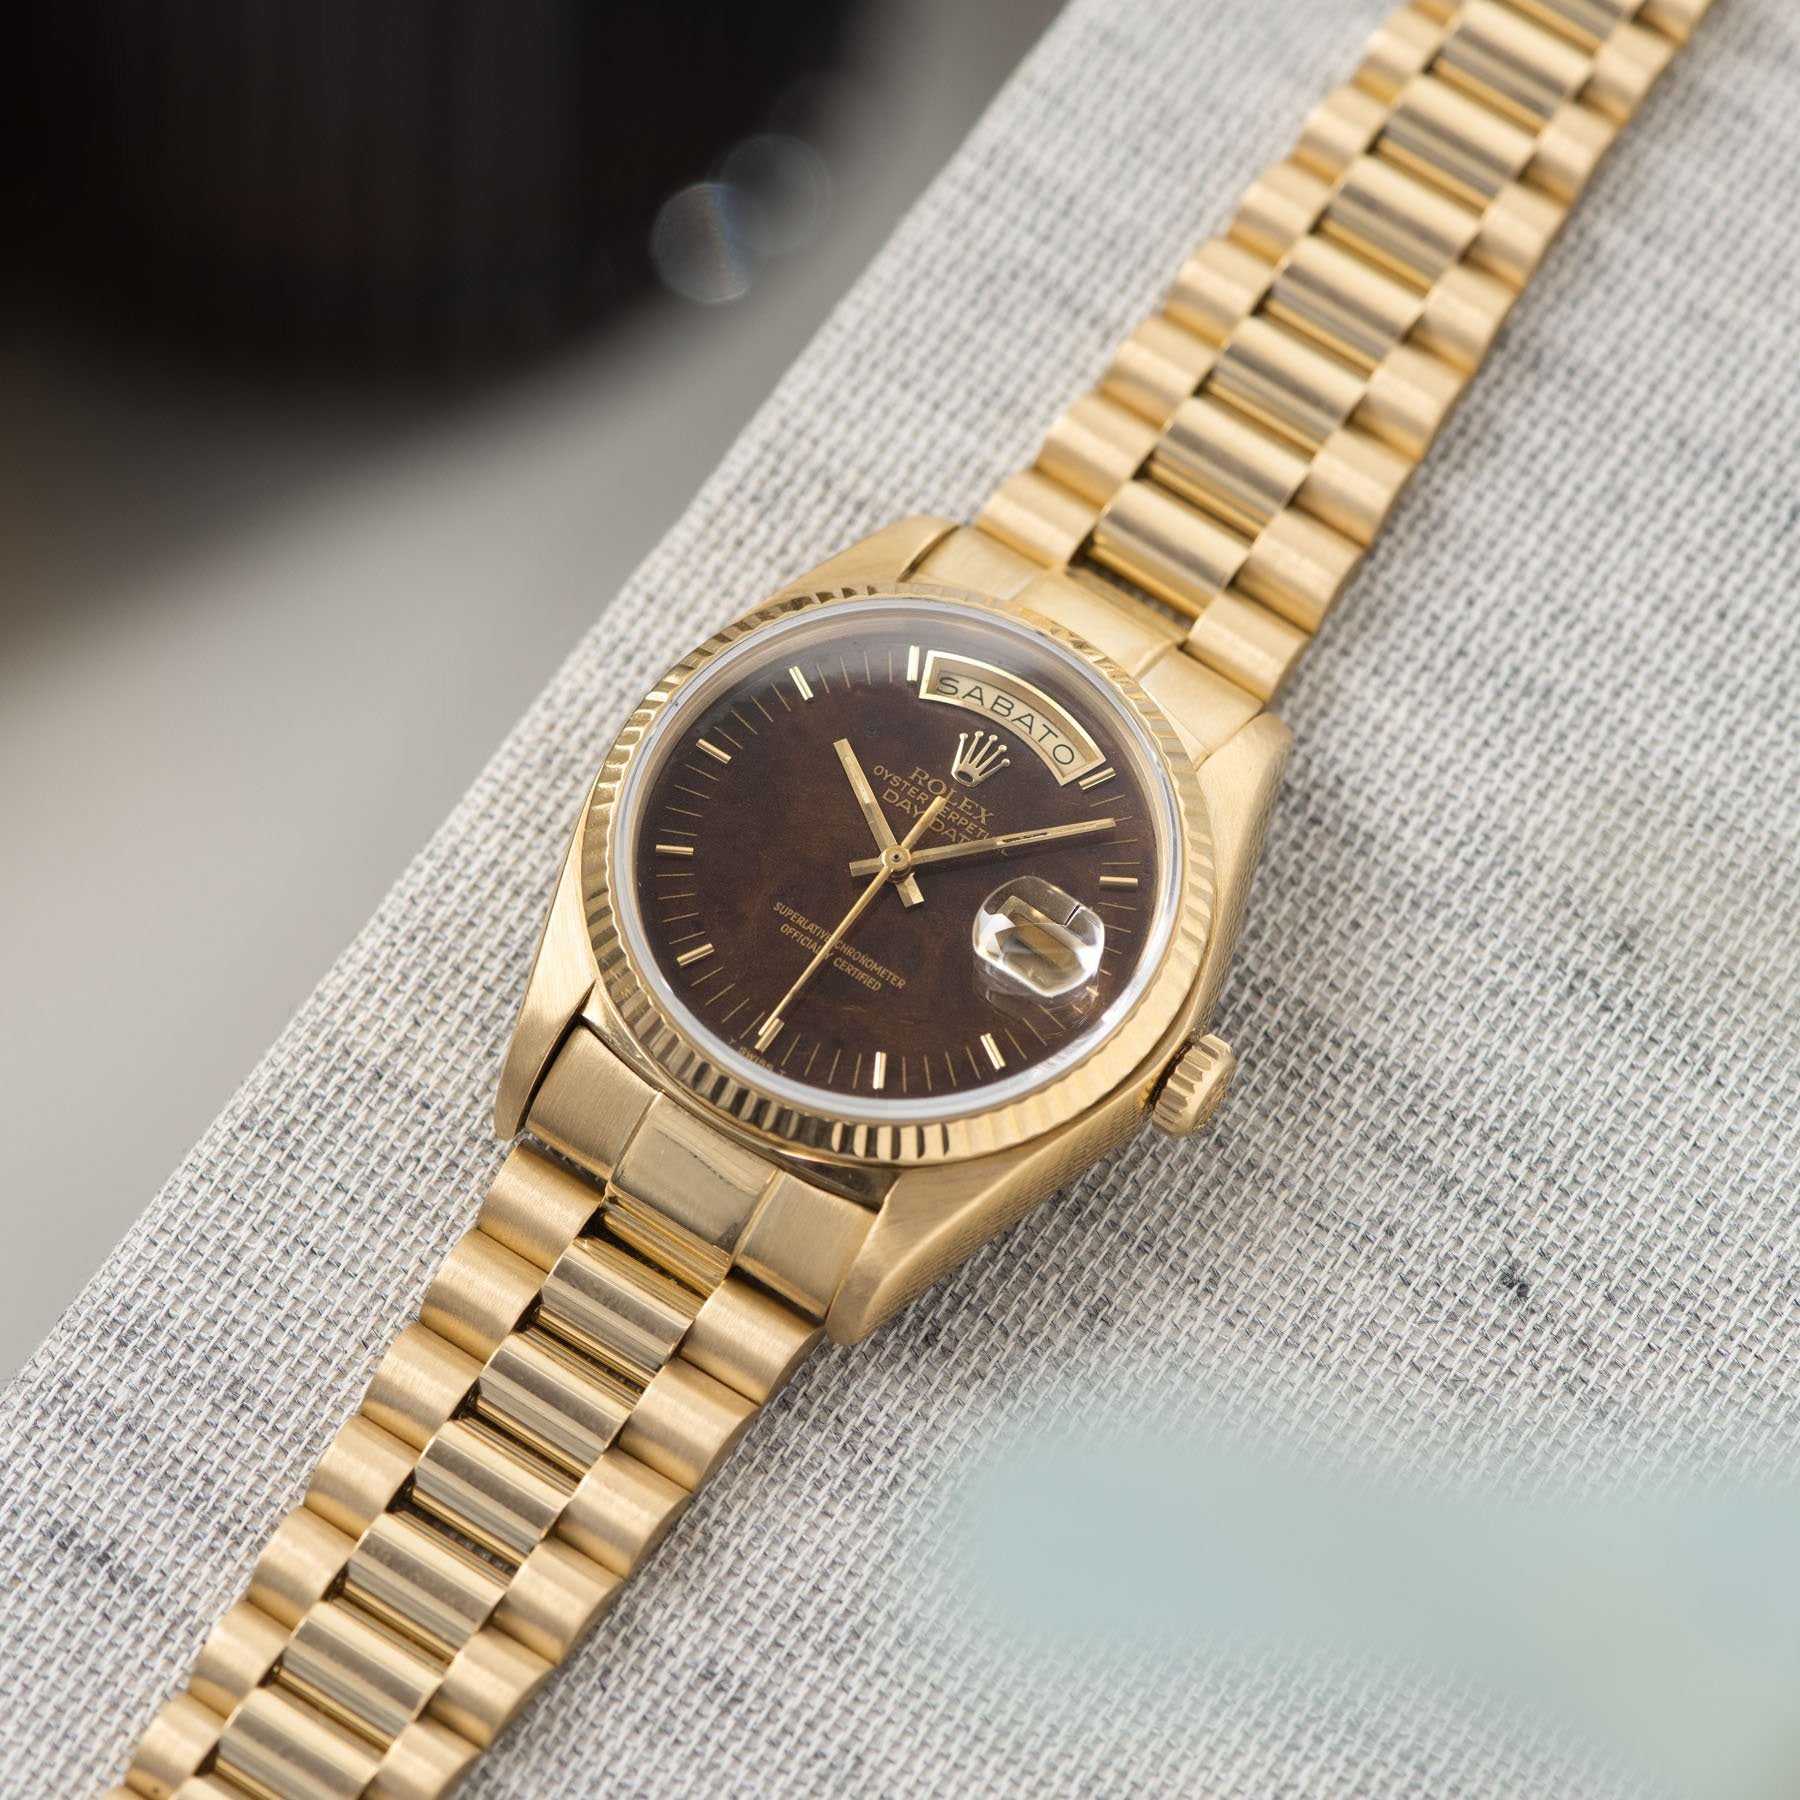 Rolex Day-Date Dark Wood Dial Reference 18038